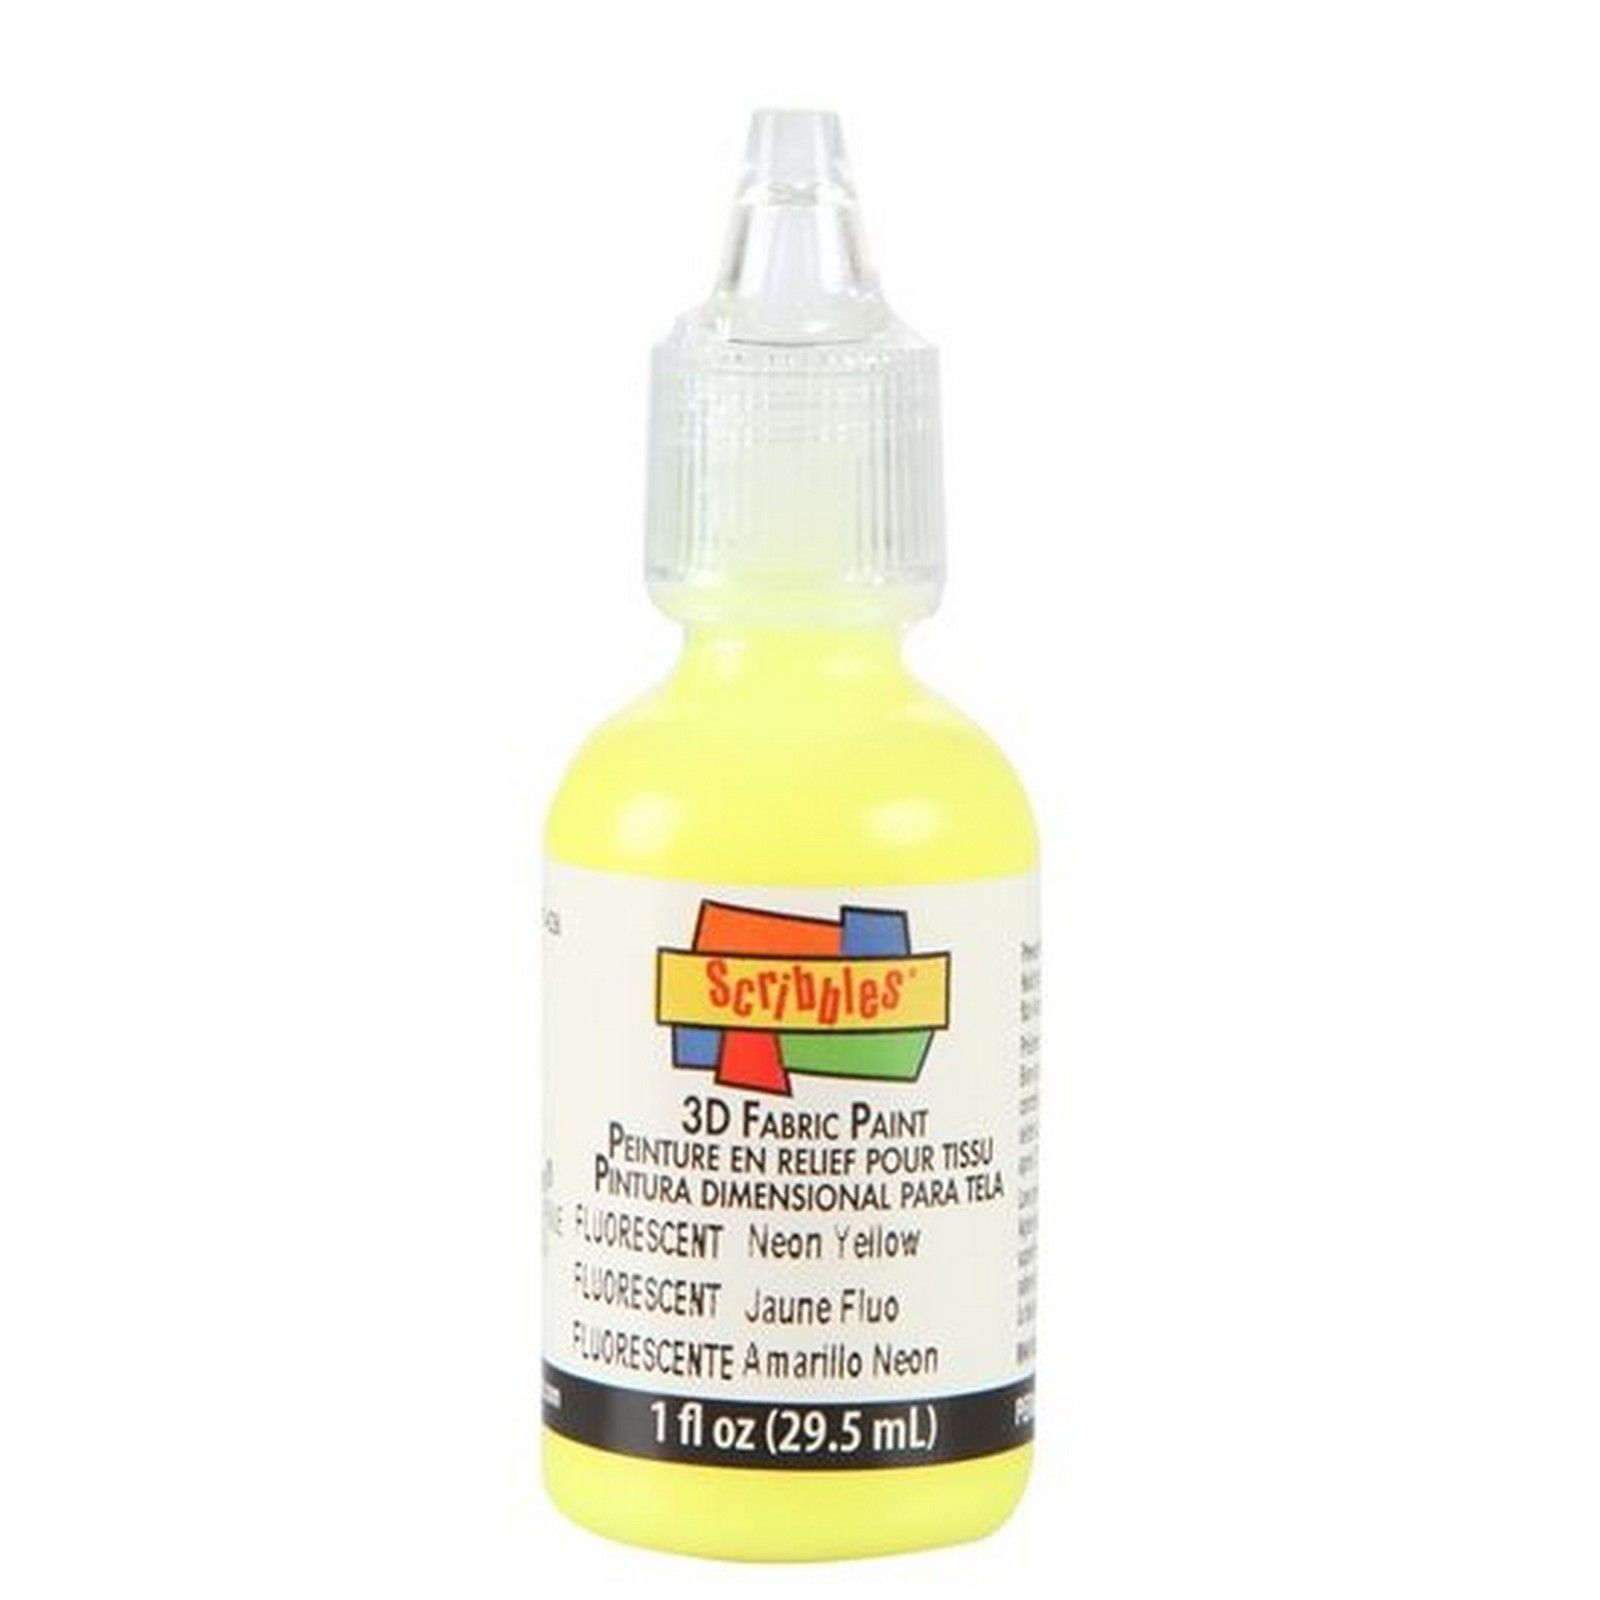 Scribbles • 3D Fabric Paint Neon 29.5ml Yellow